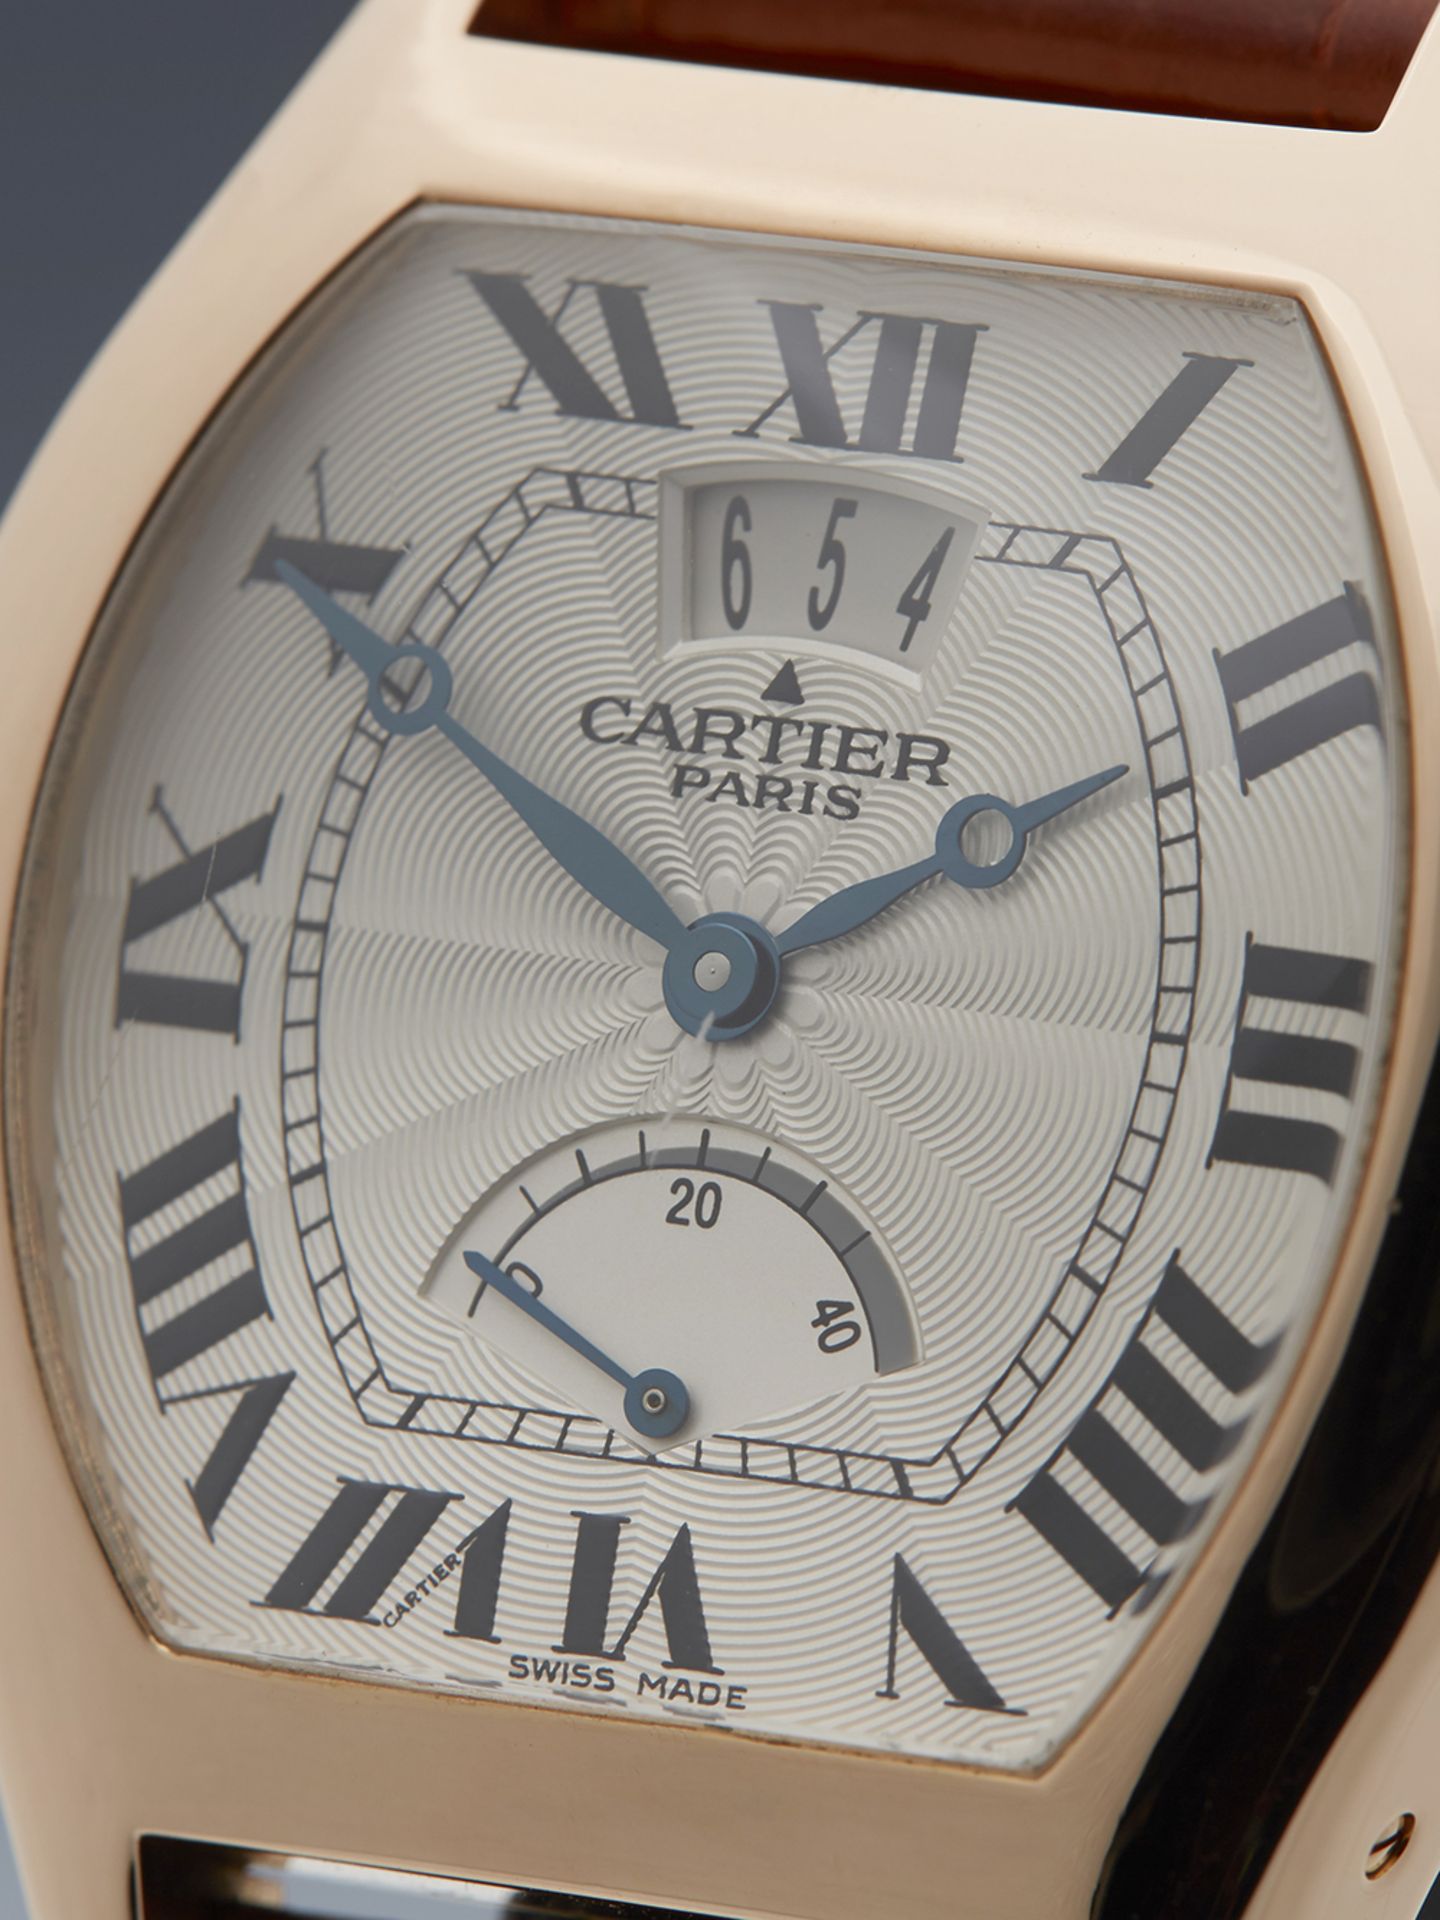 Cartier, Tortue Privee Power Reserve 18k Rose Gold Limited Edition 2689G - Image 2 of 10